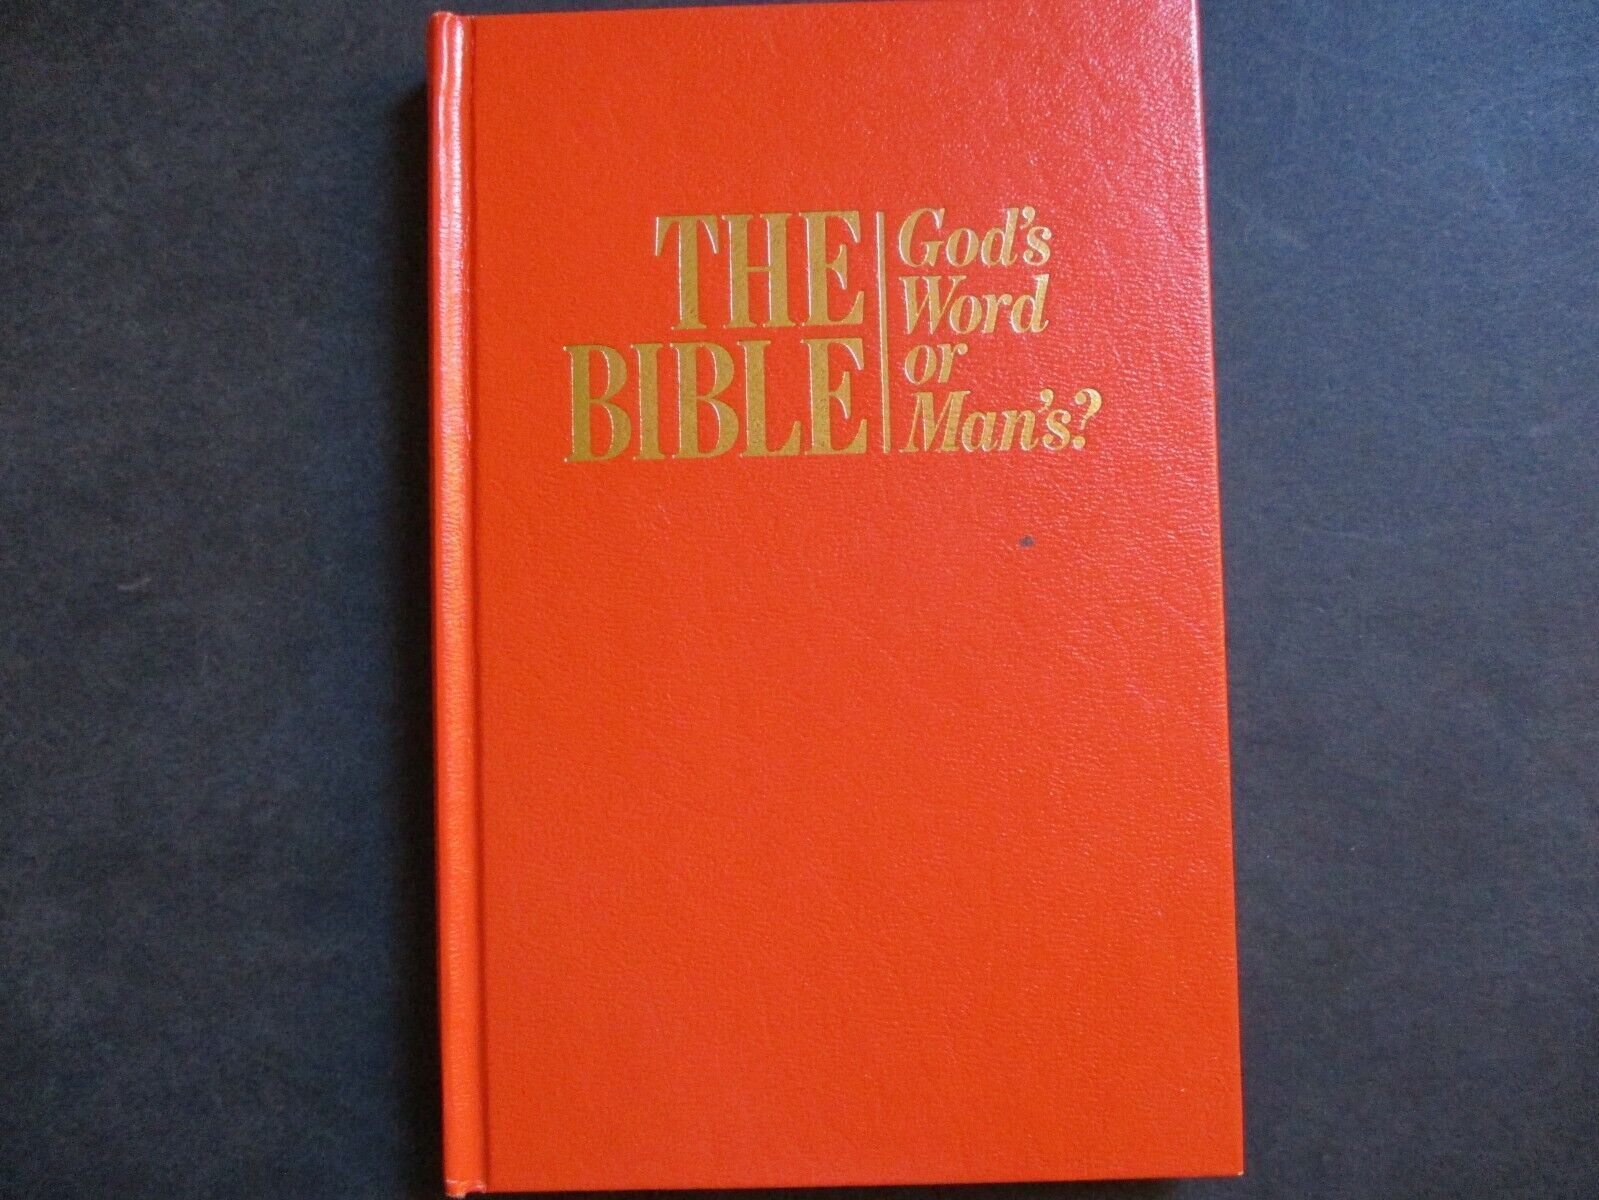 1989 The Bible-God's Word of Man's? book